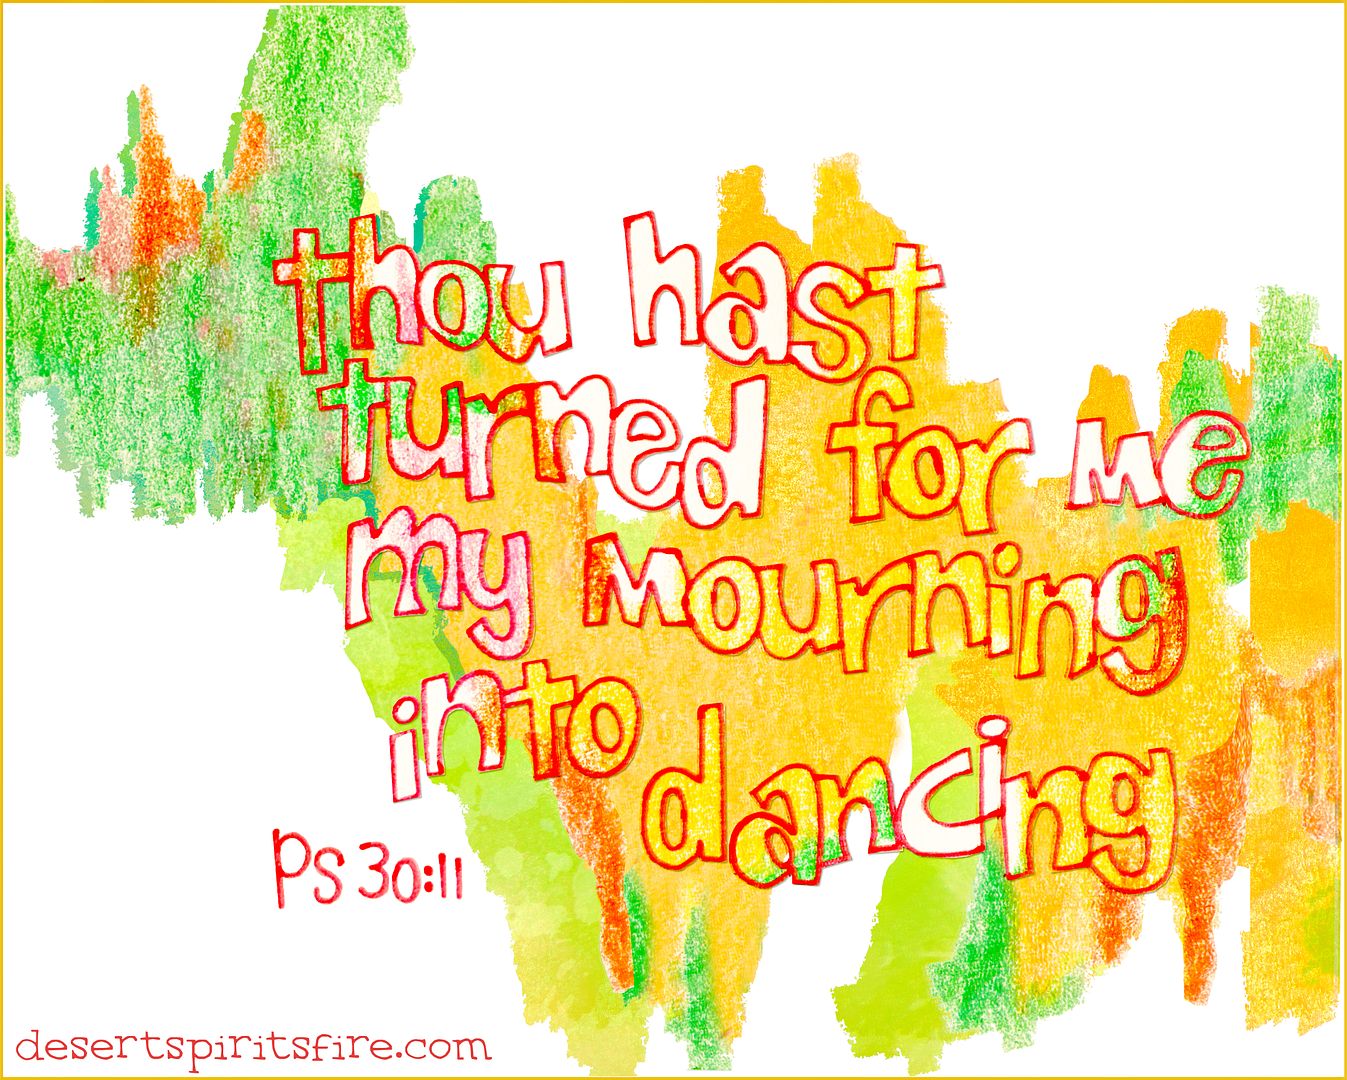 Mourning into Dancing, Psalm 30:11, Easter Vigil